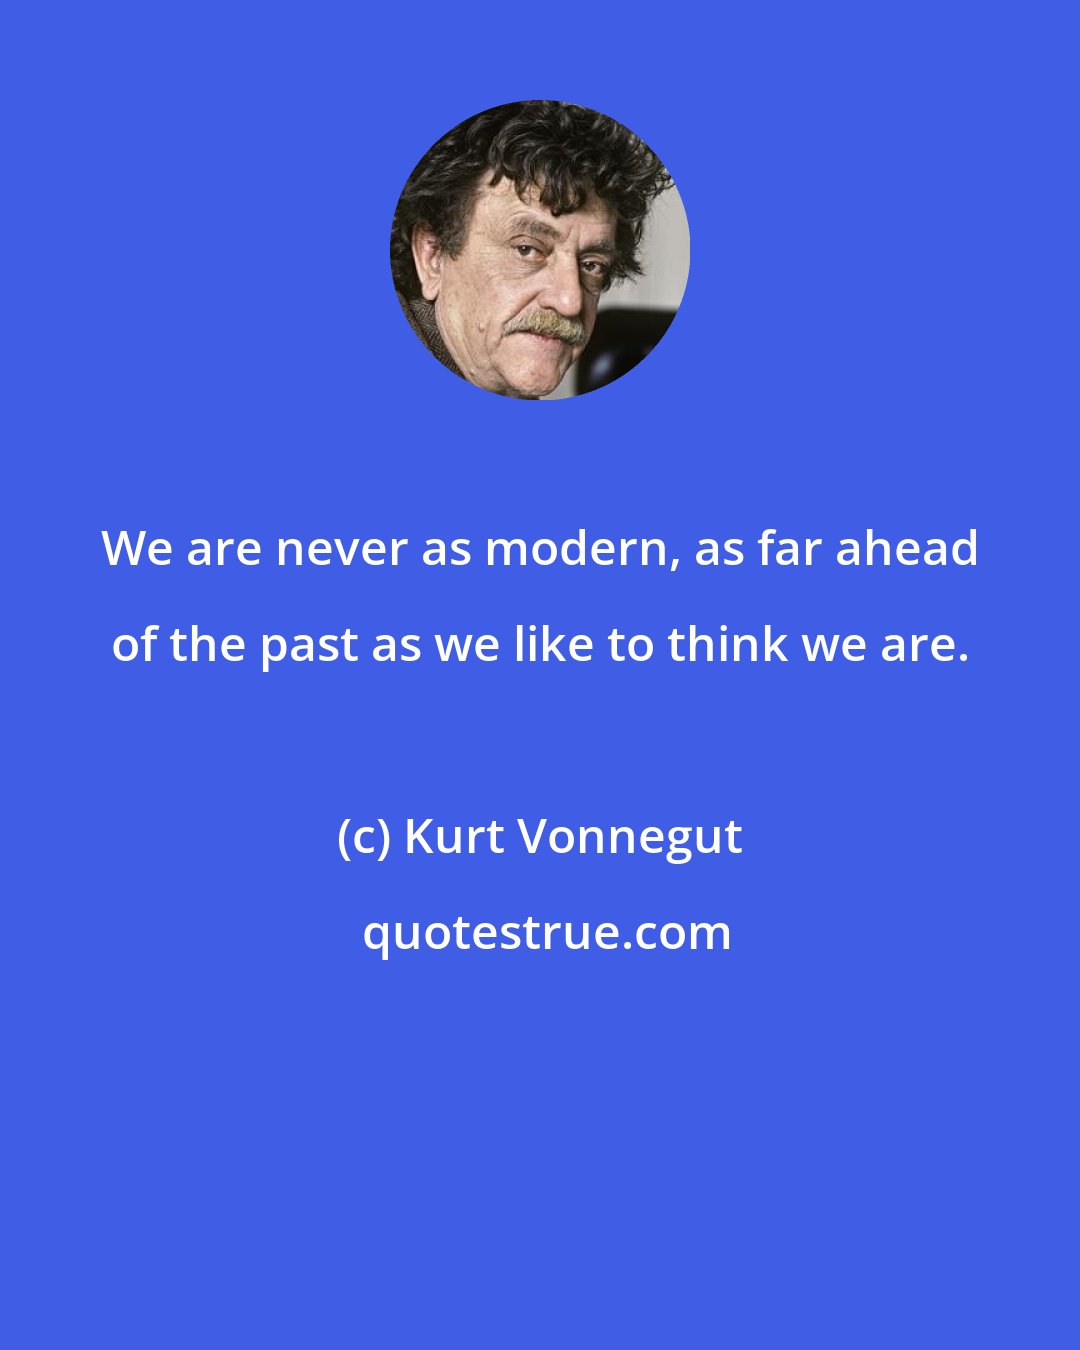 Kurt Vonnegut: We are never as modern, as far ahead of the past as we like to think we are.